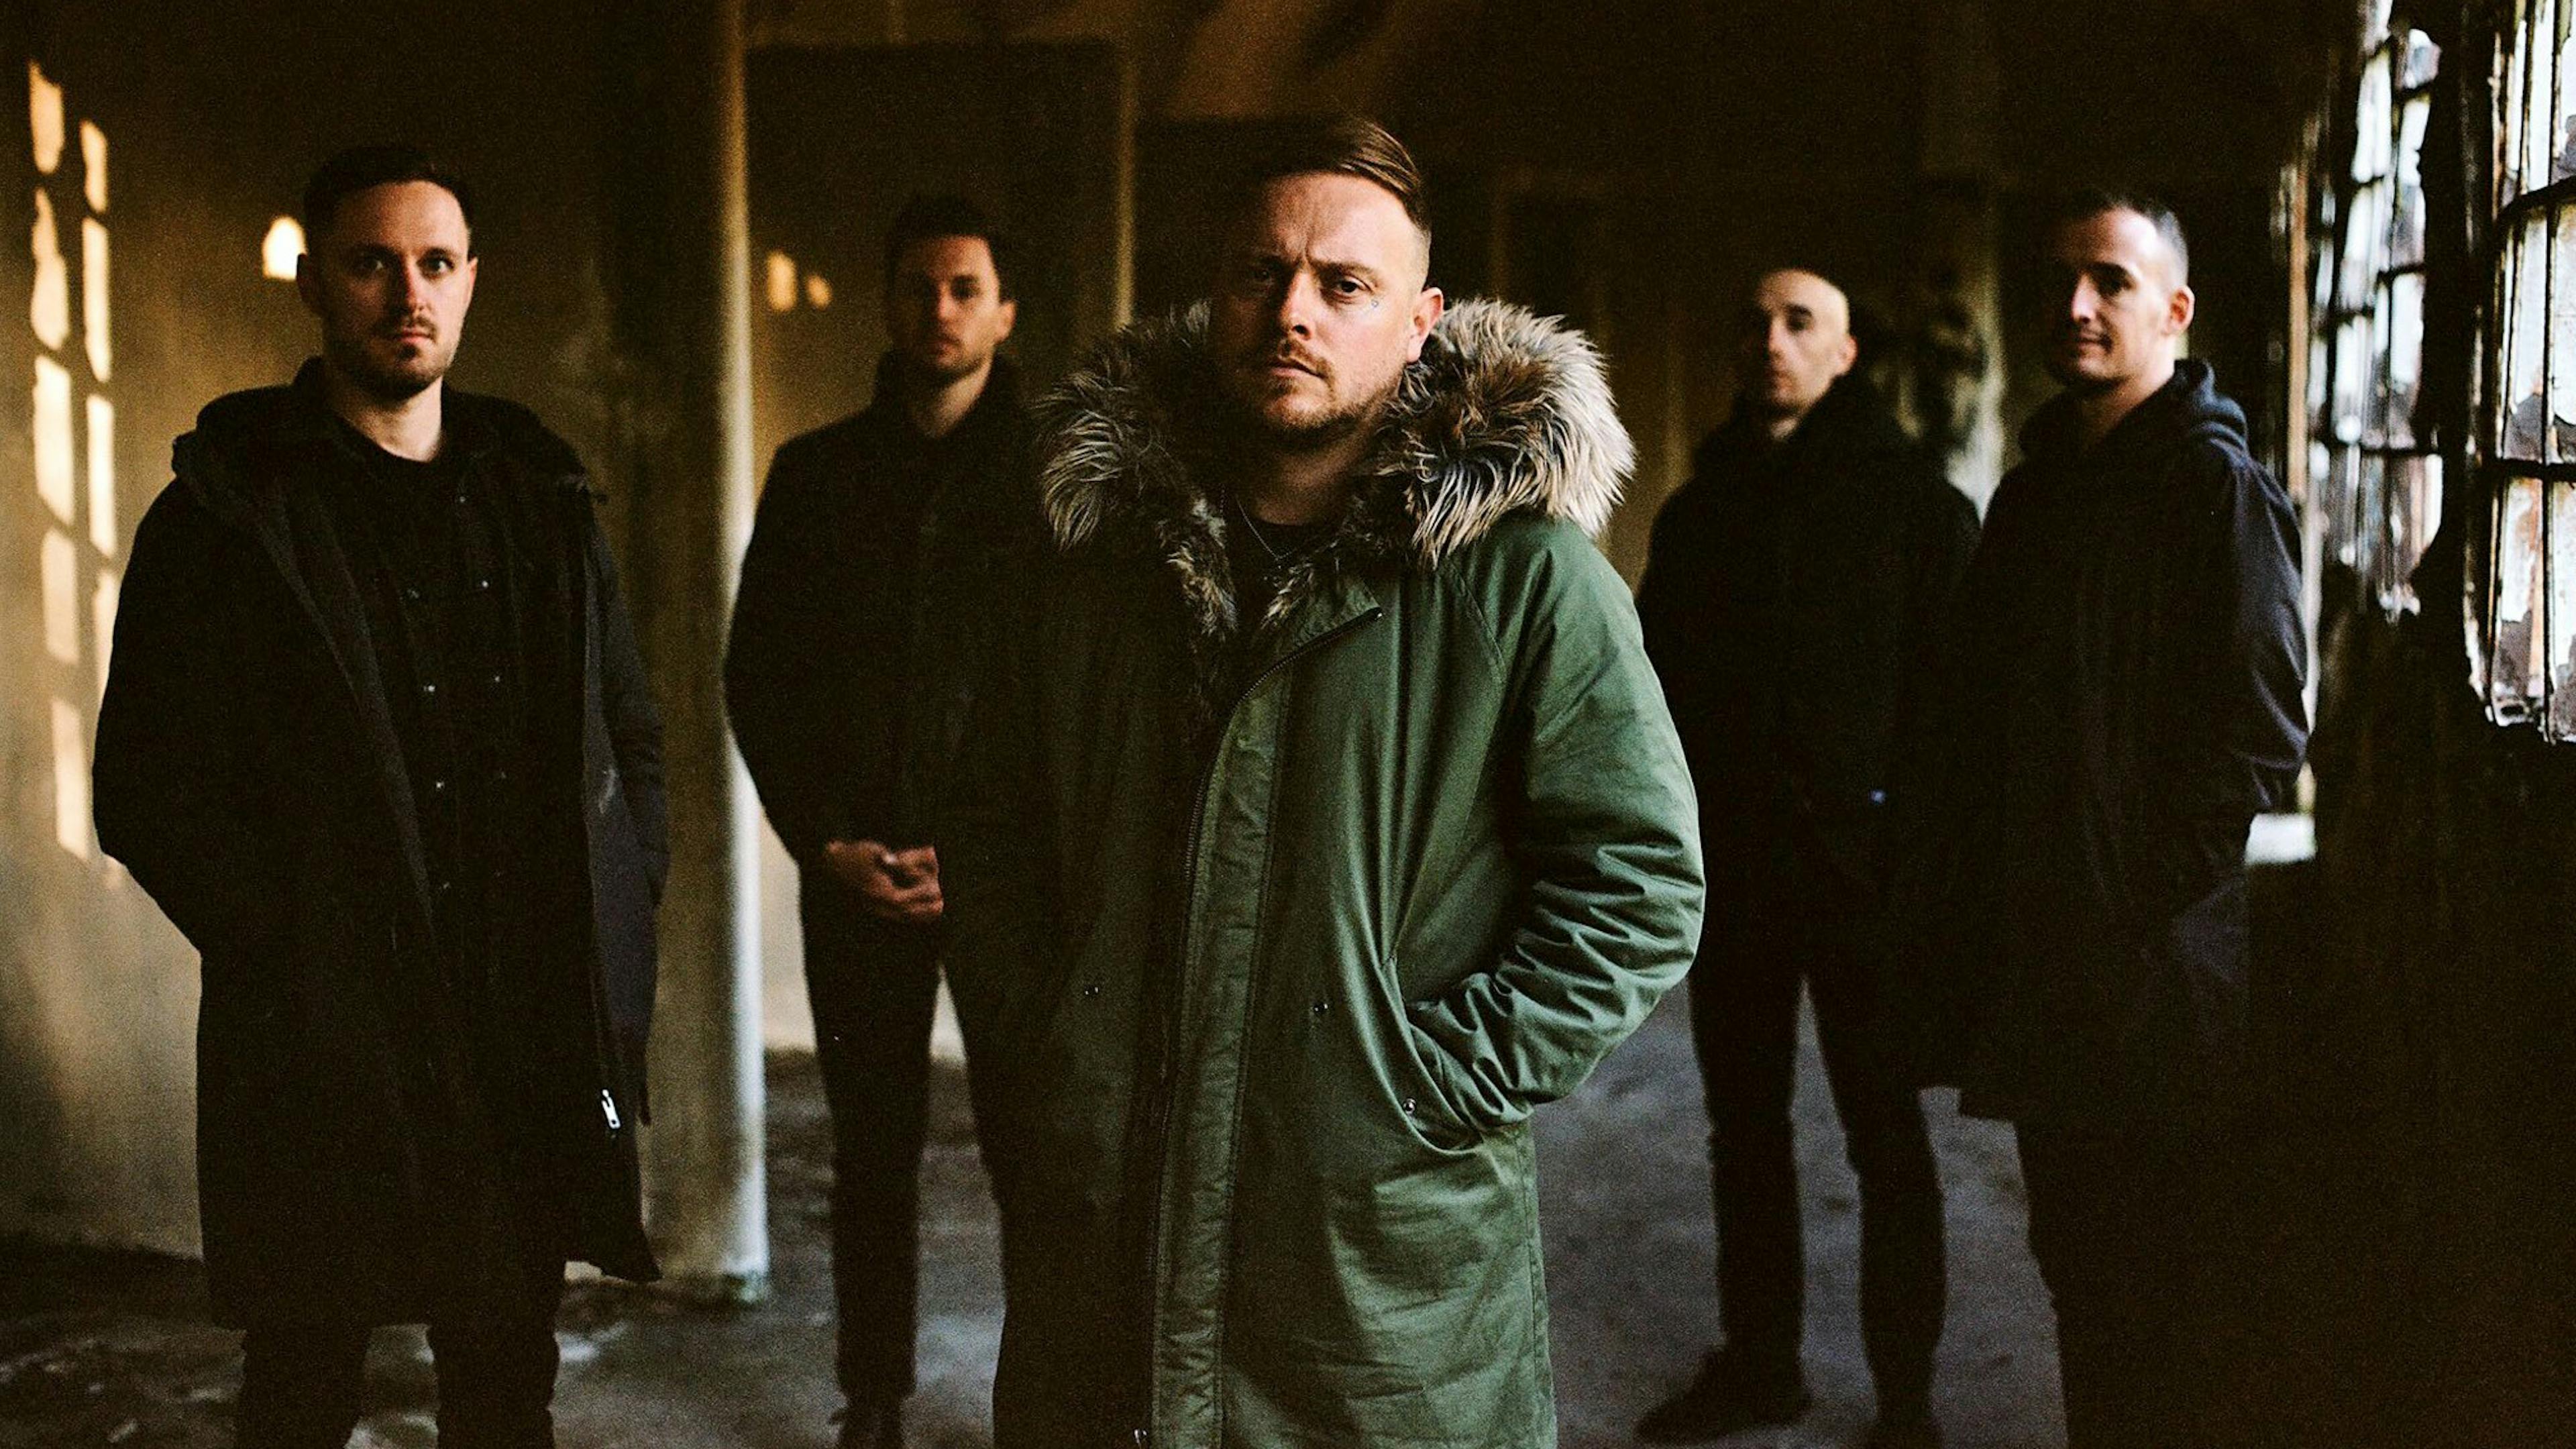 Listen to Architects' huge new single, Meteor